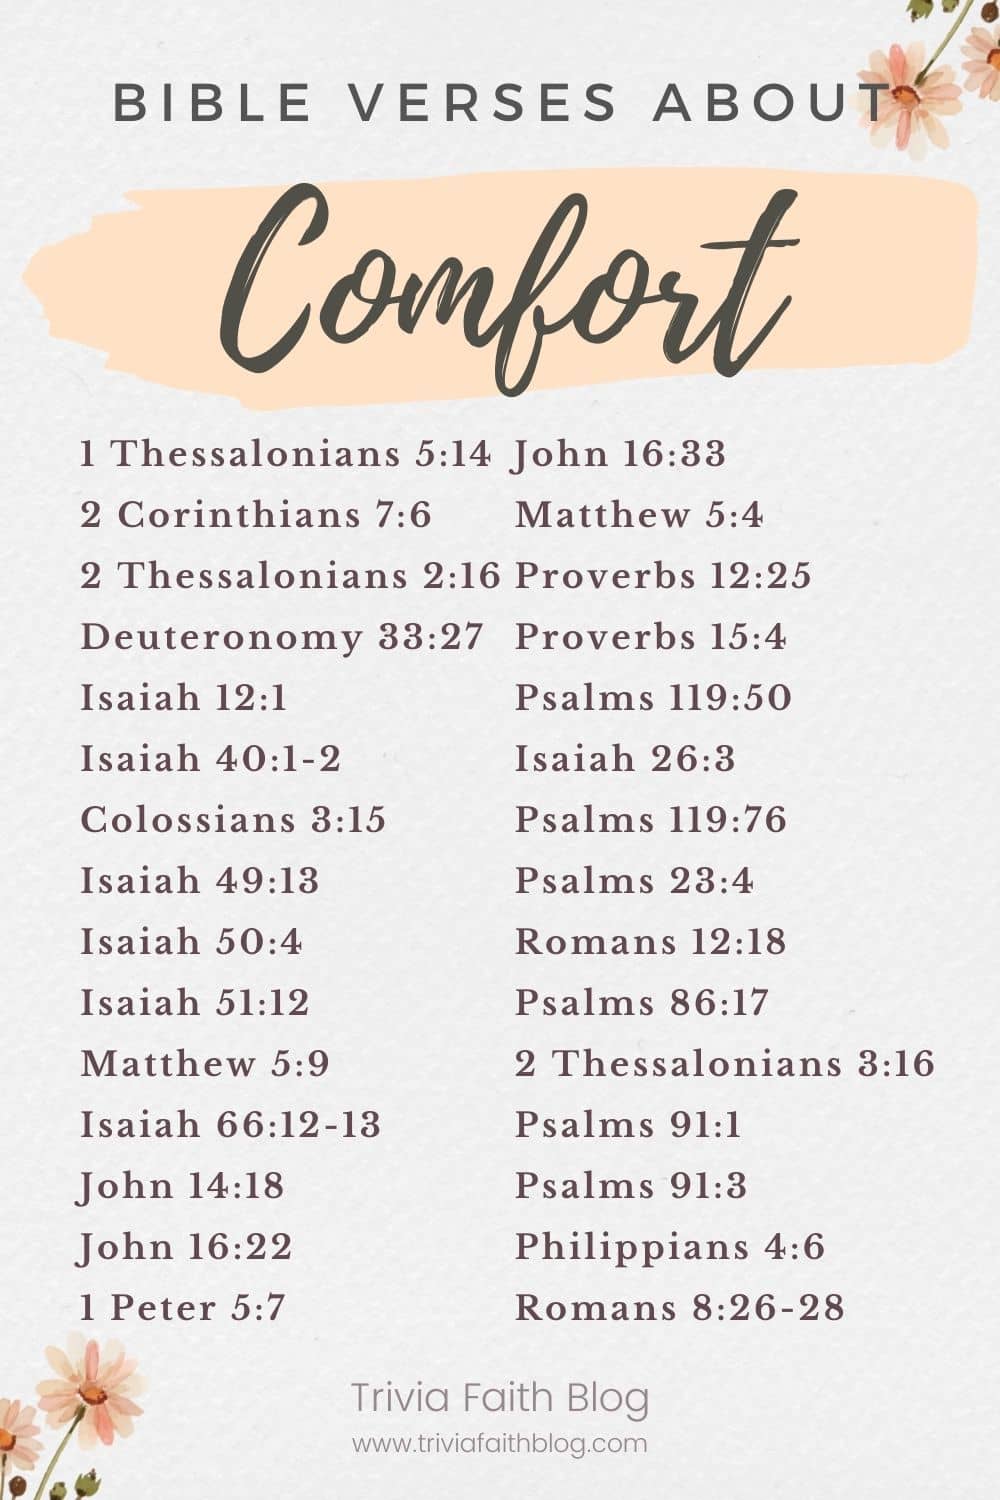 Bible verses about comfort